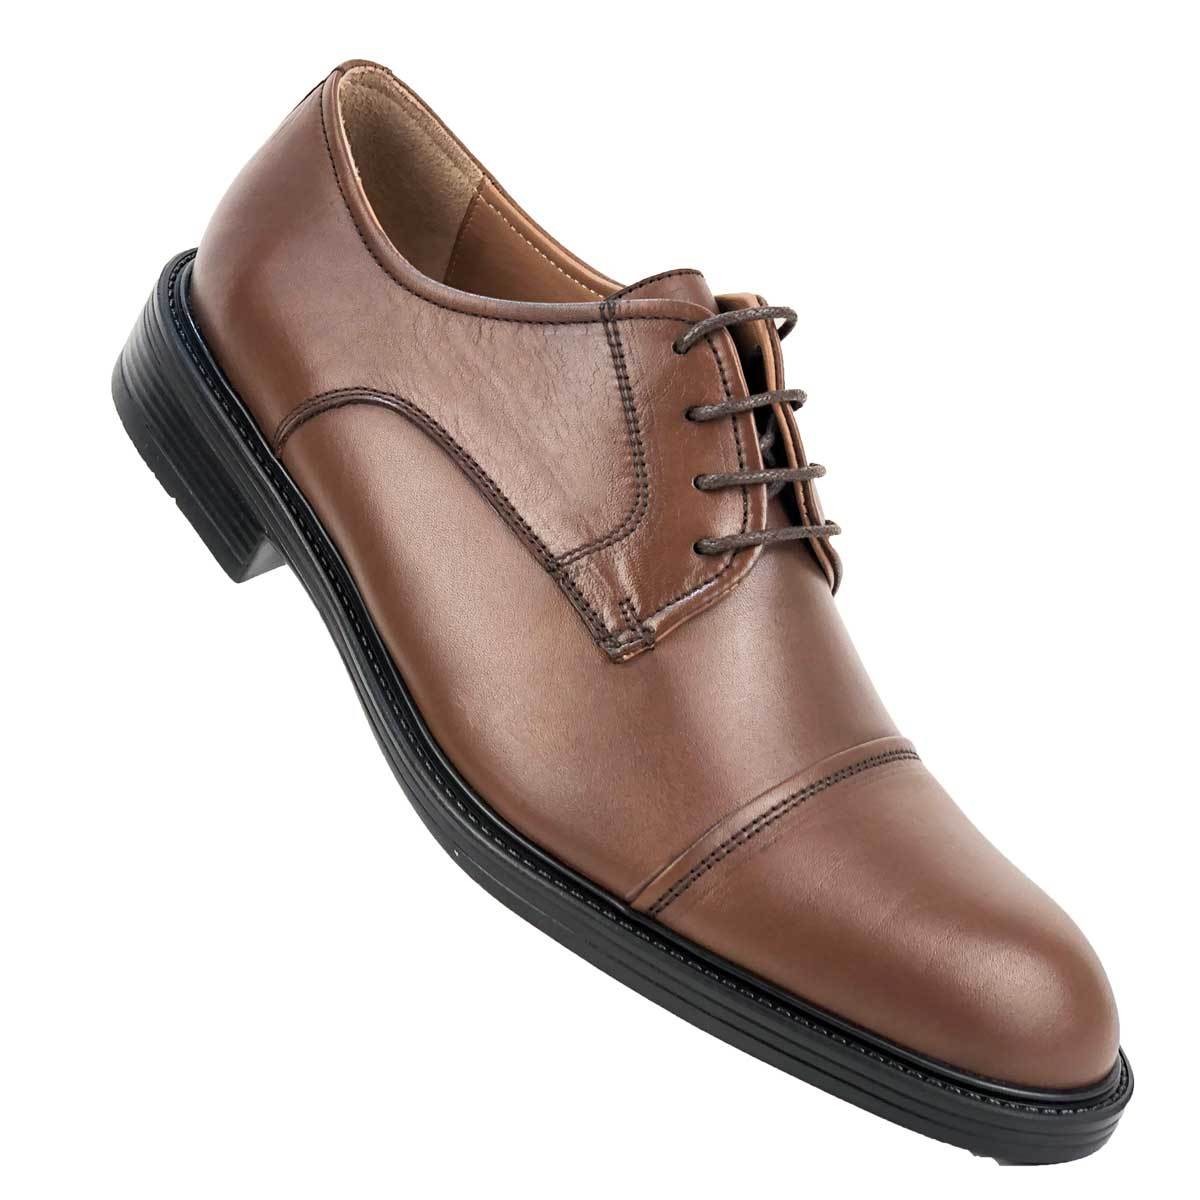 CH311-015 - Chaussure cuir Taba - deluxe-maroc